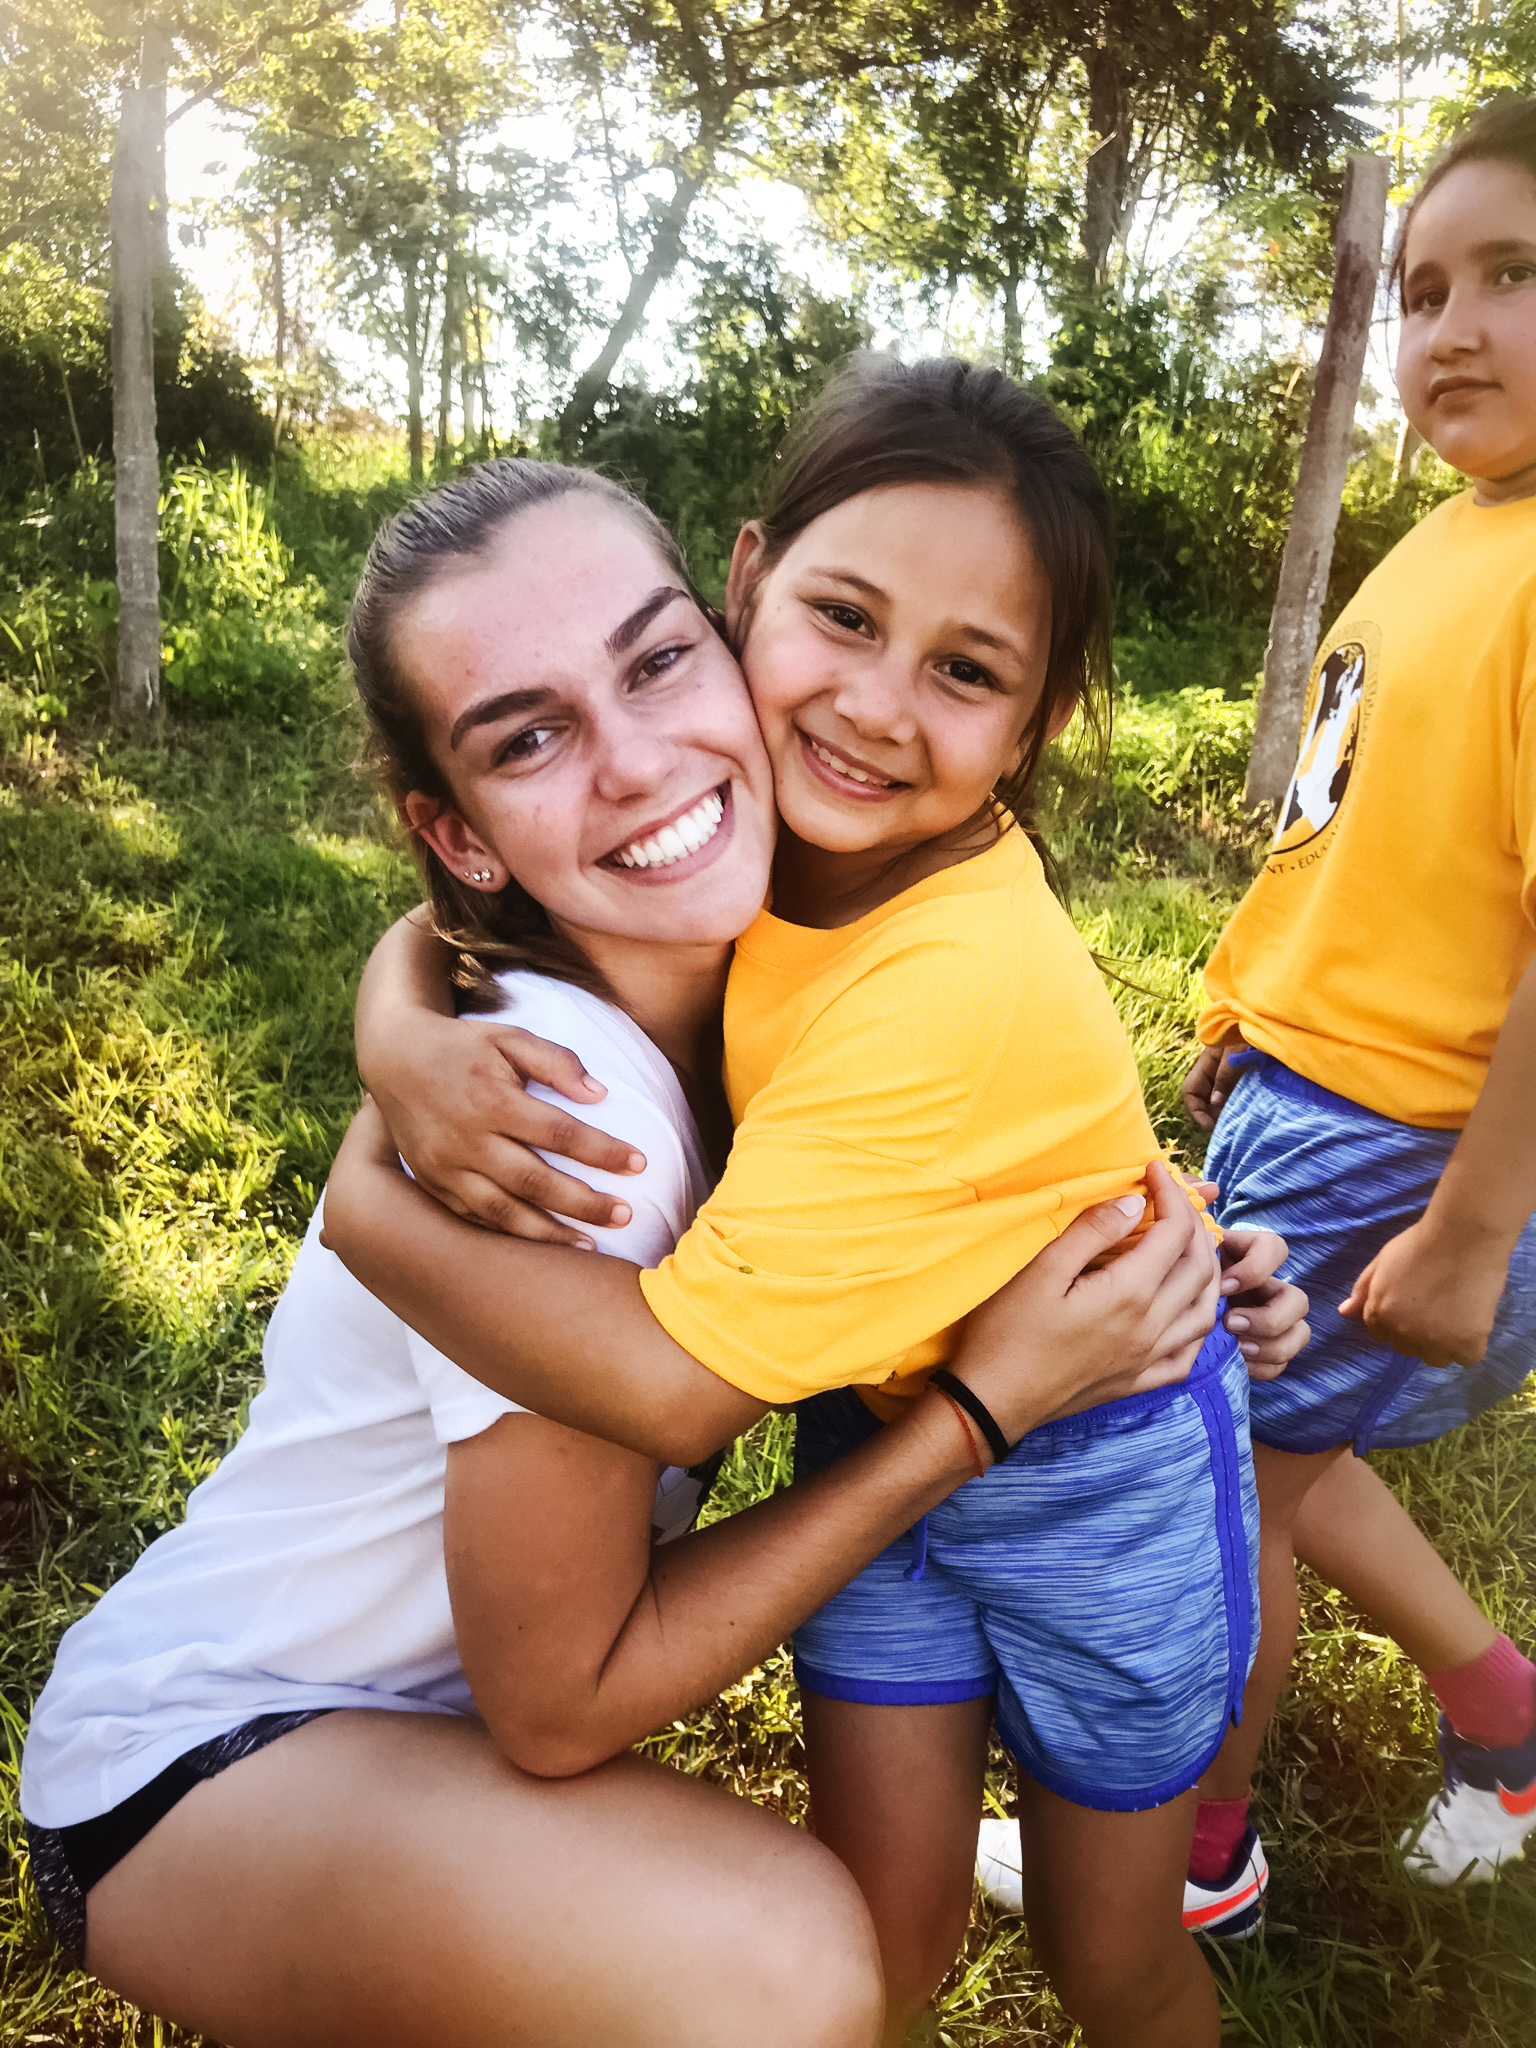 Emily embracing love with a young girl at a Girls Soccer Worldwide partnered school during her 2018 trip to Paraguay.